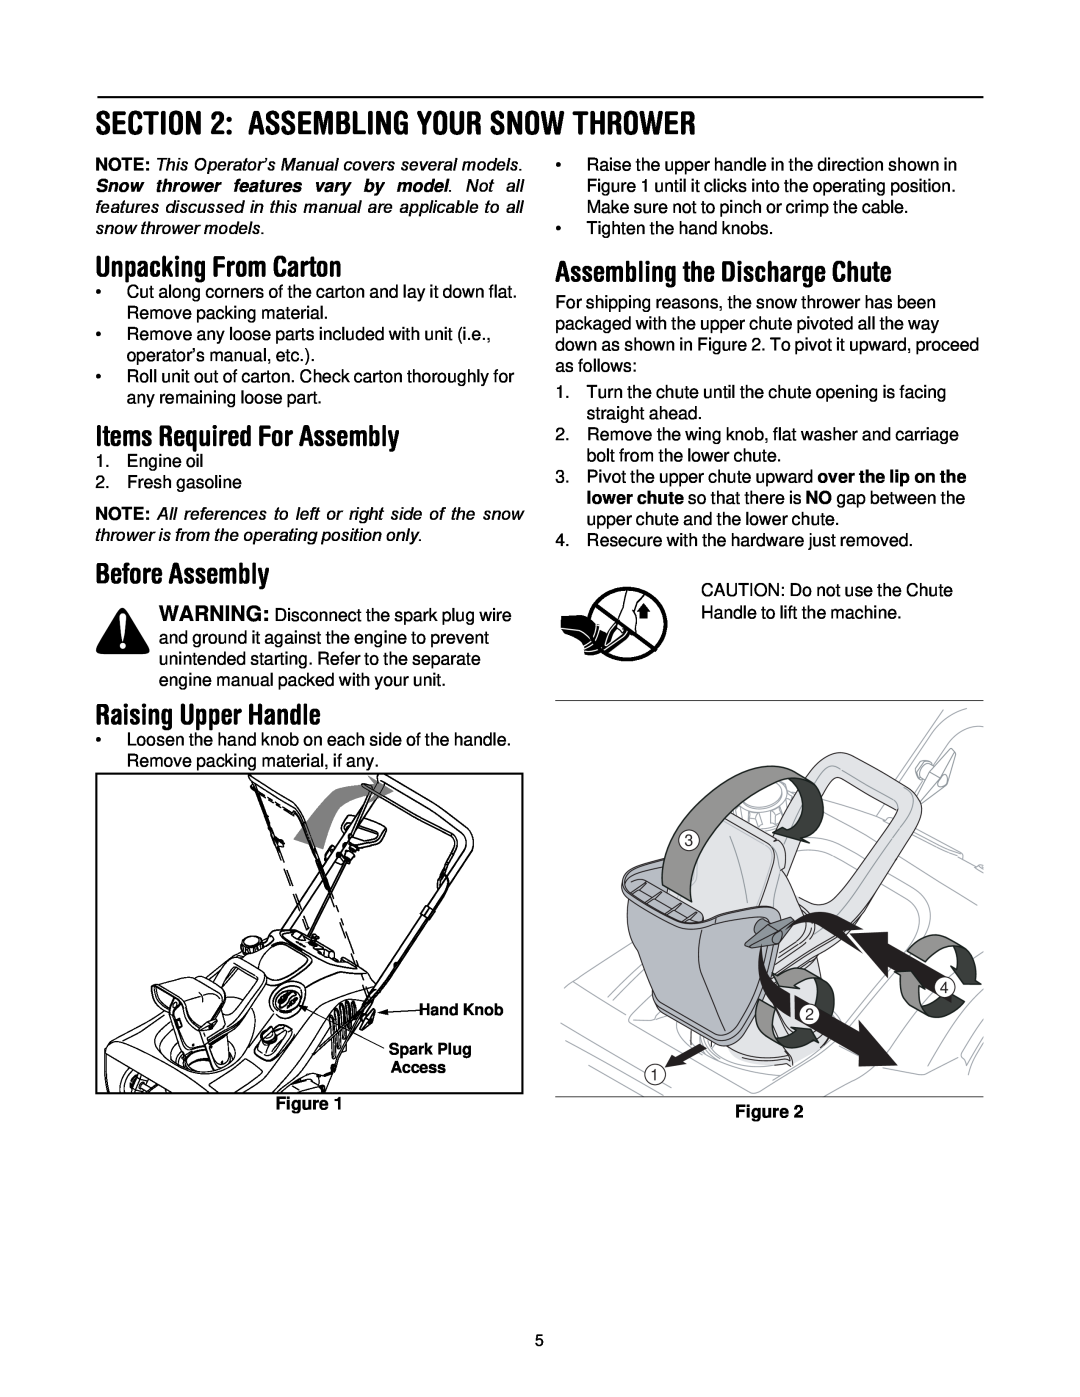 MTD E2B5, E295 manual Assembling Your Snow Thrower, Unpacking From Carton, Items Required For Assembly, Before Assembly 